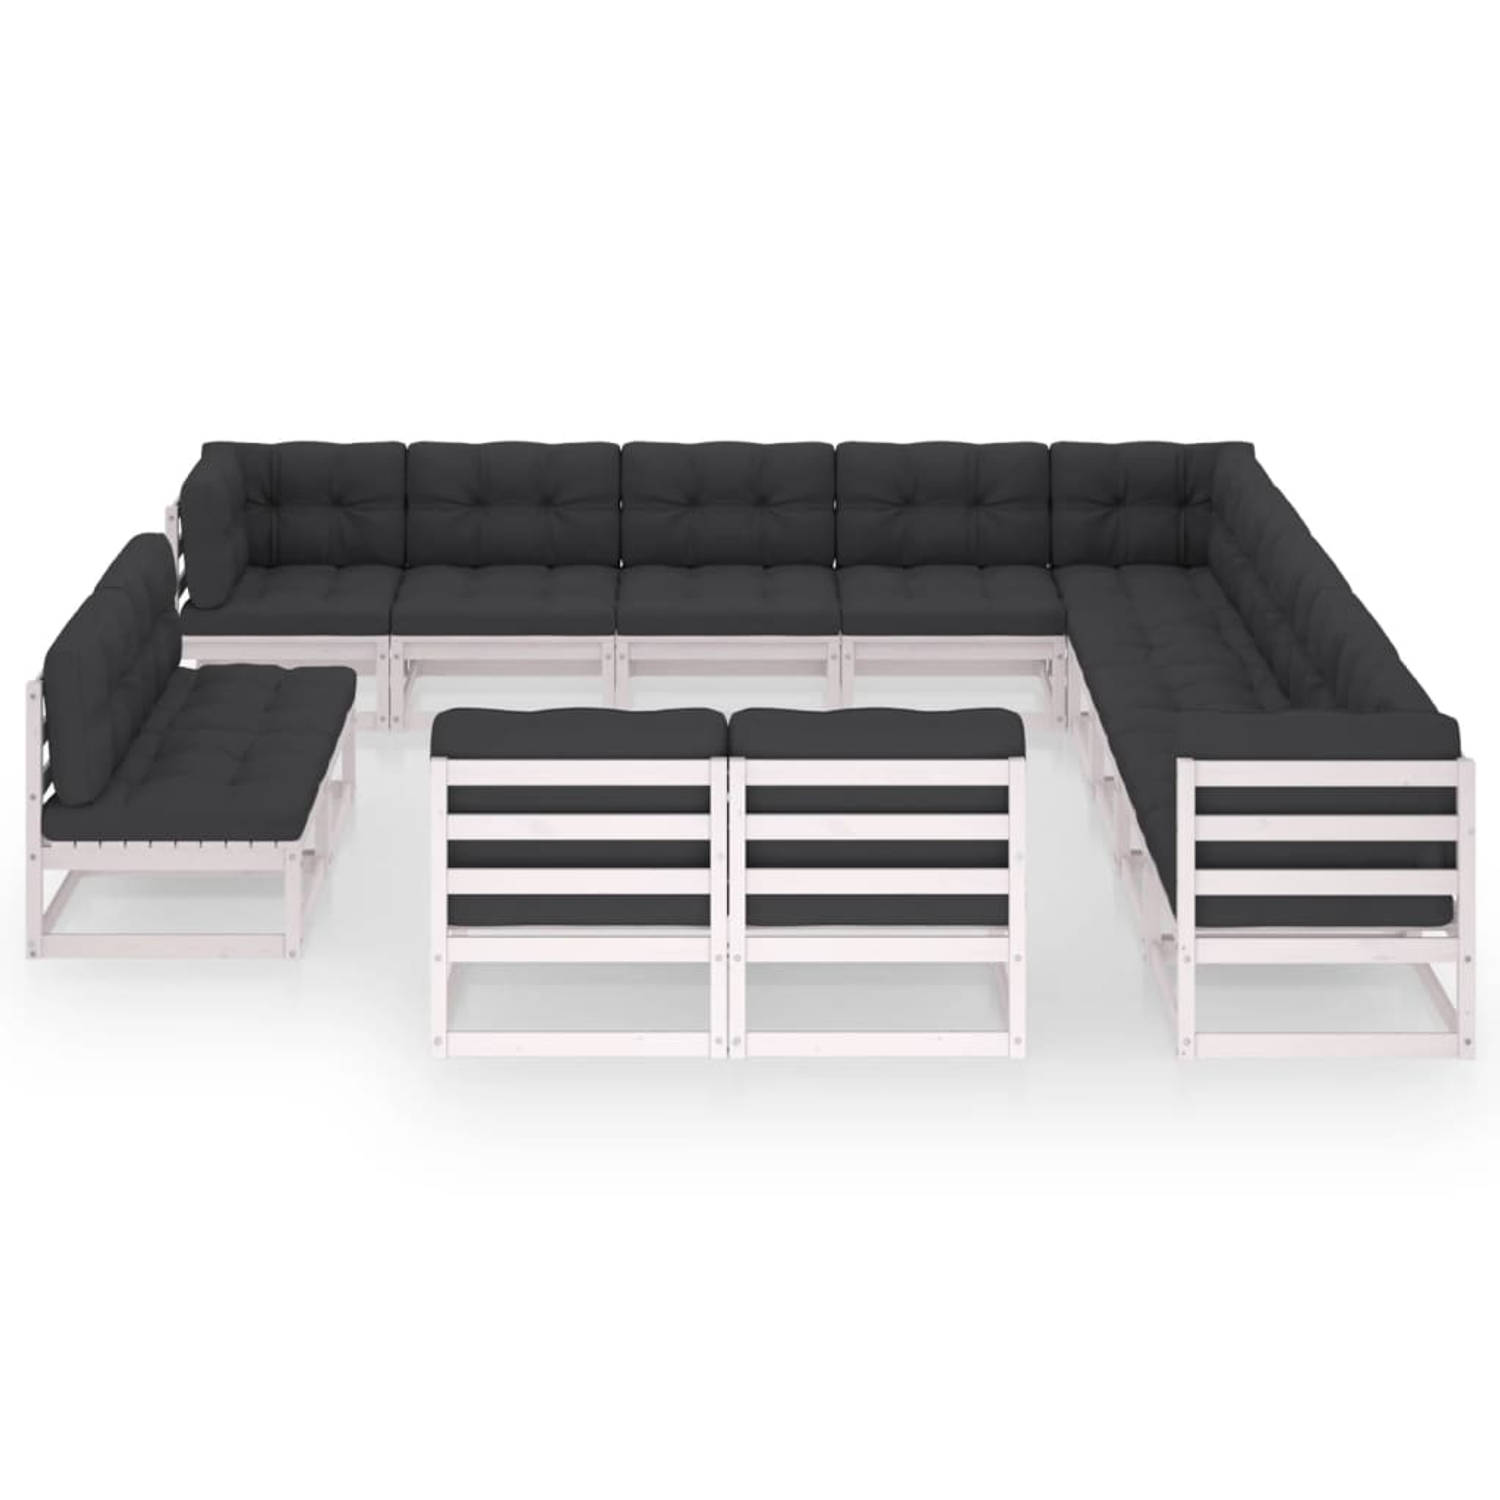 The Living Store 13-delige Loungeset met kussens massief grenenhout wit - Tuinset